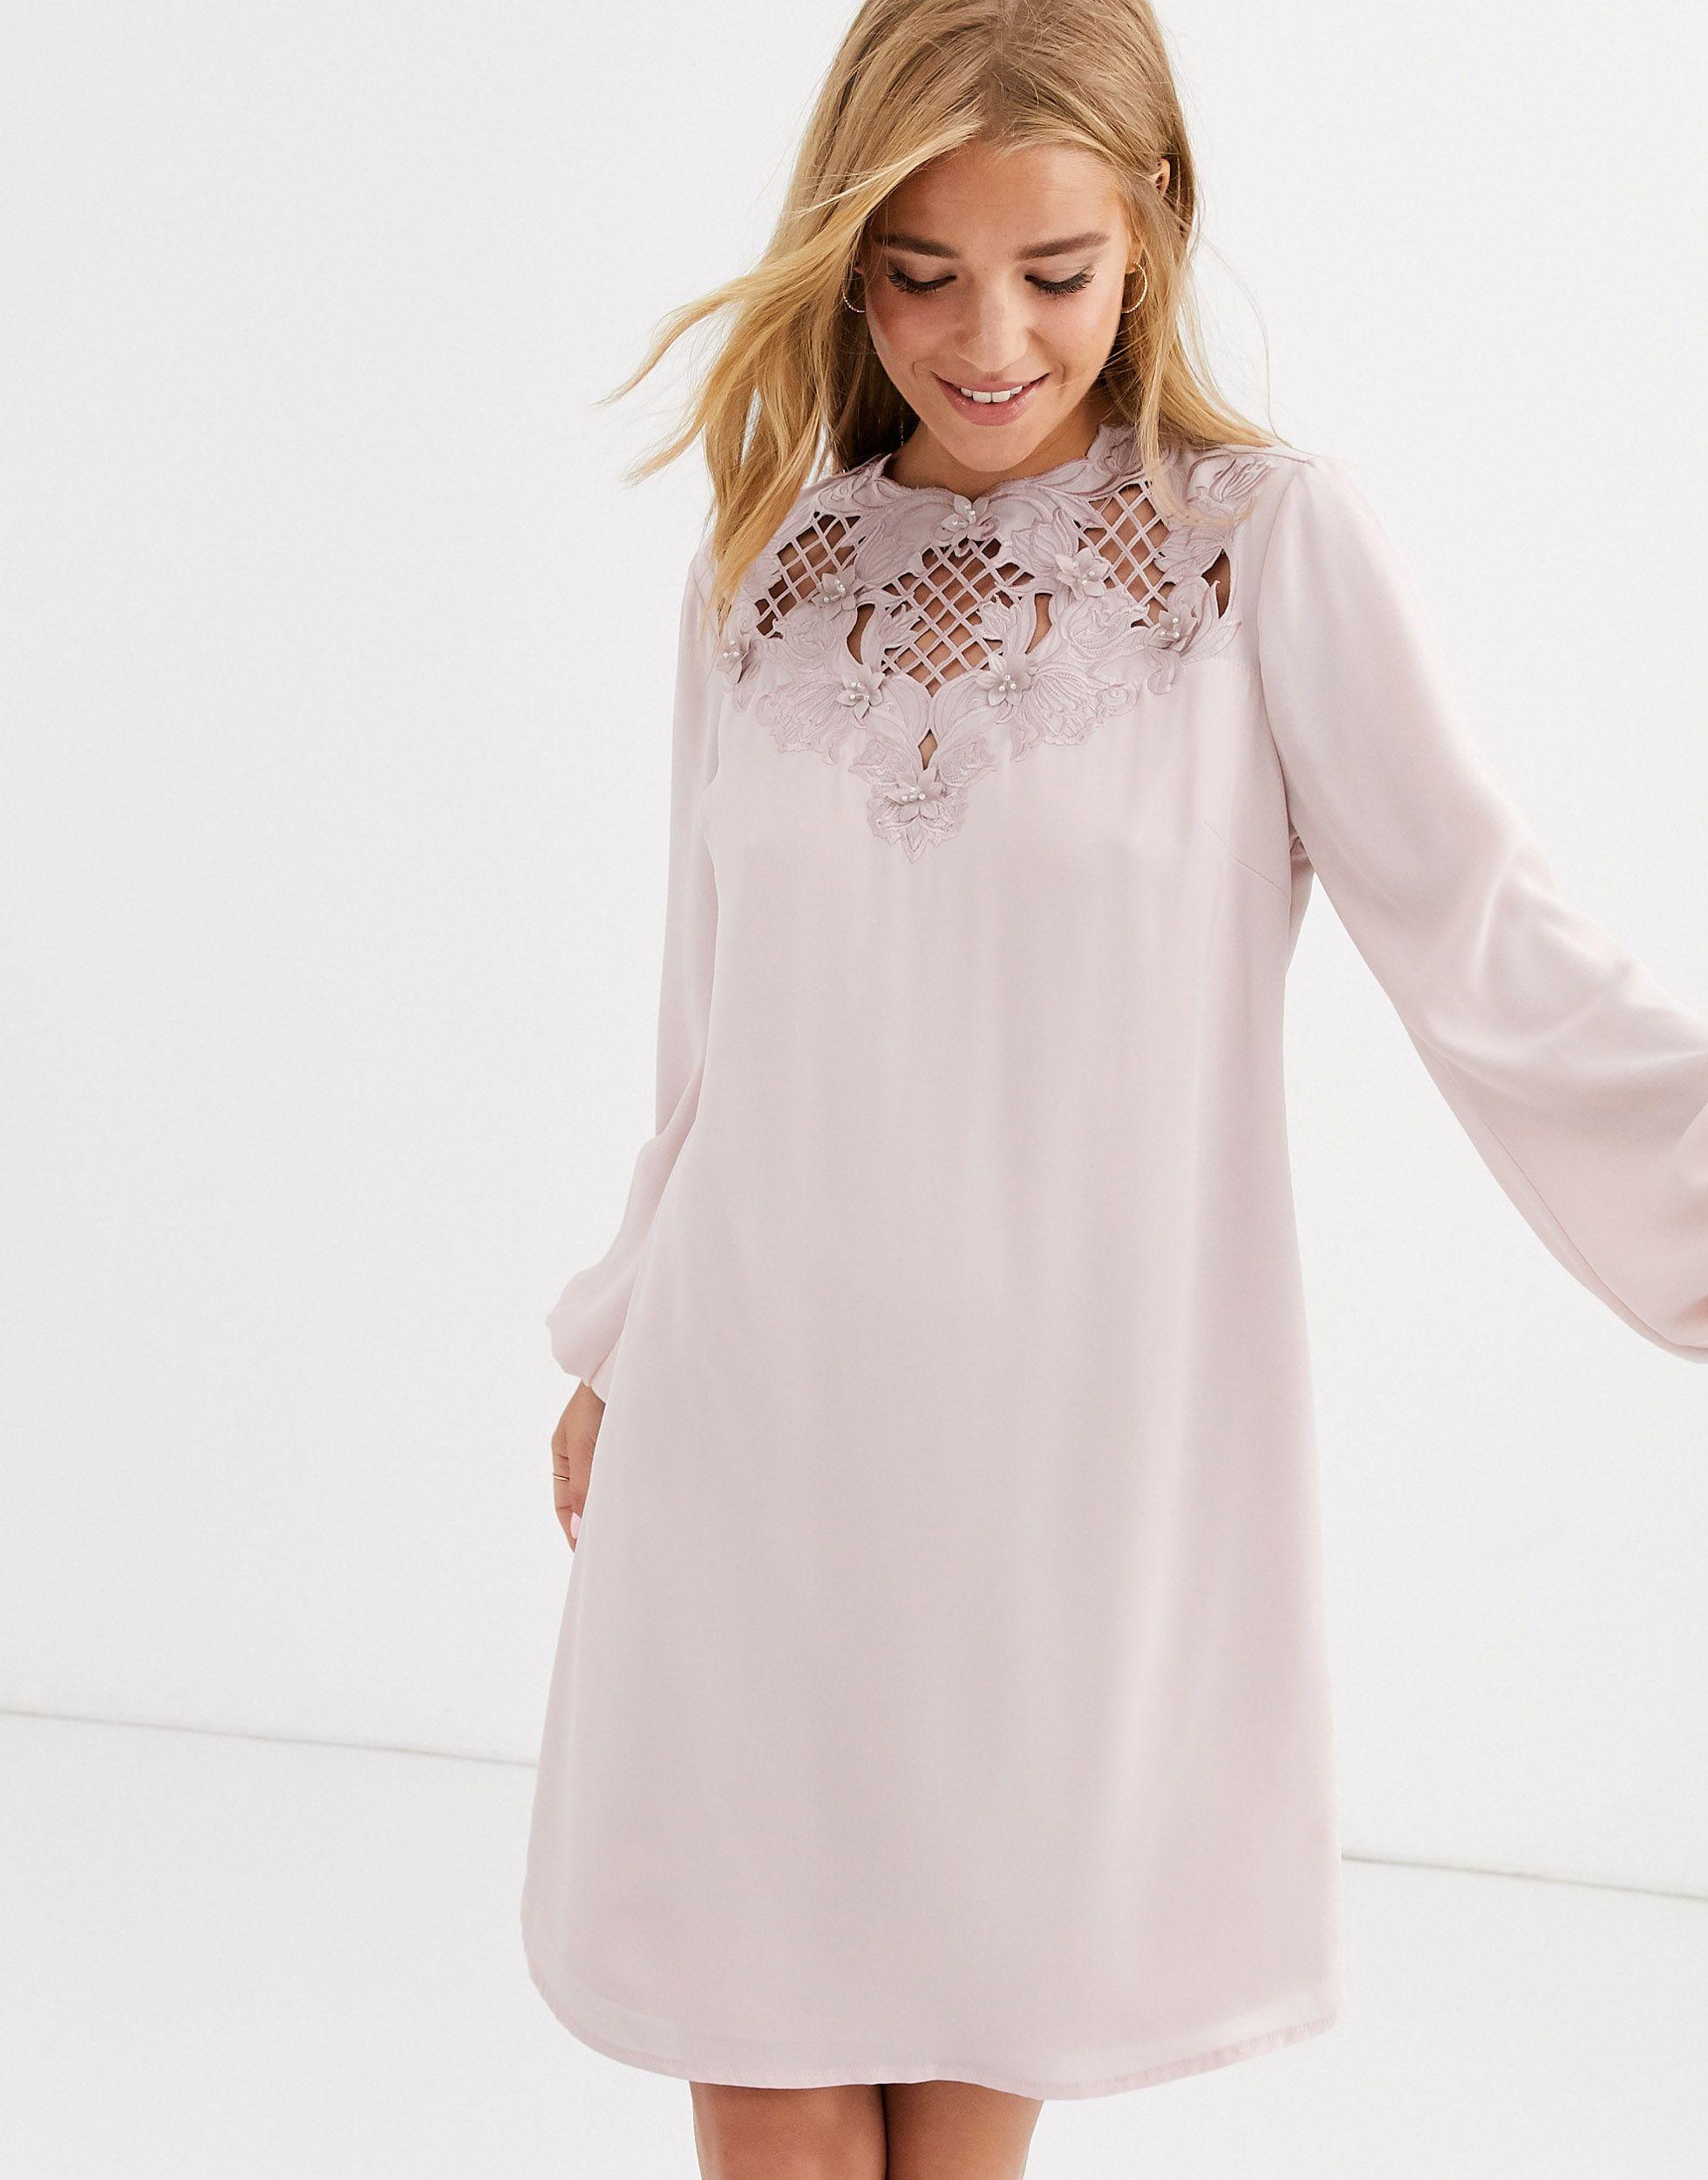 Lipsy Synthetic Long Sleeve Embroidered Shift Dress in Pink - Lyst